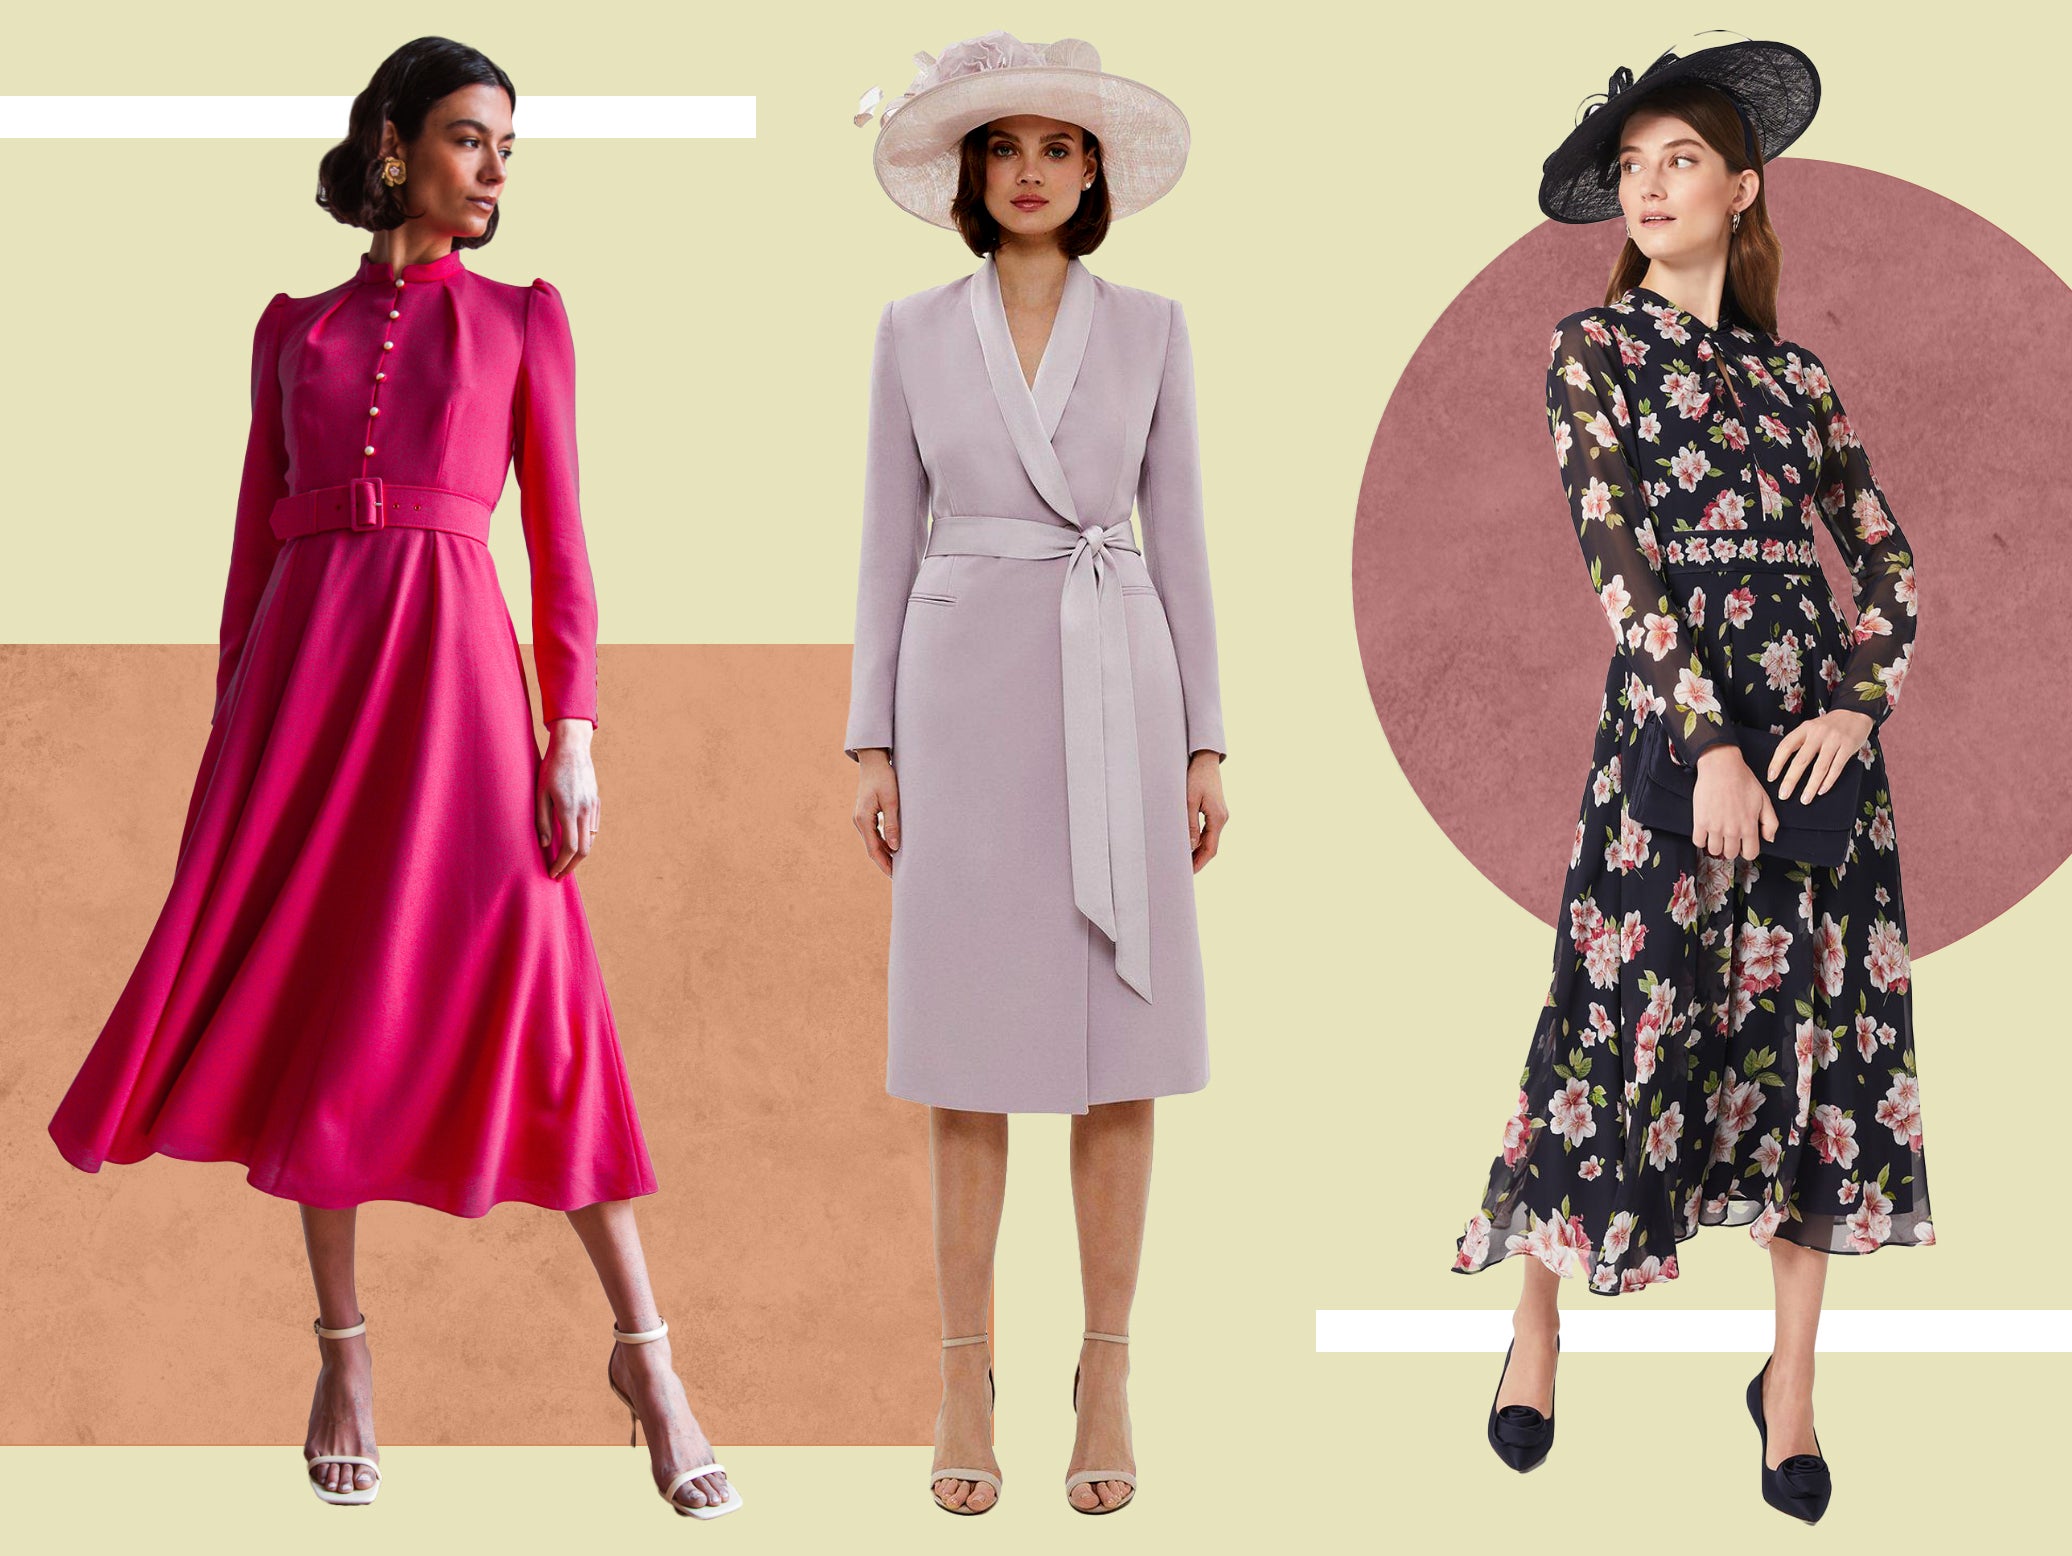 The Most Glamorous and Elegant Mother of the Bride Dresses